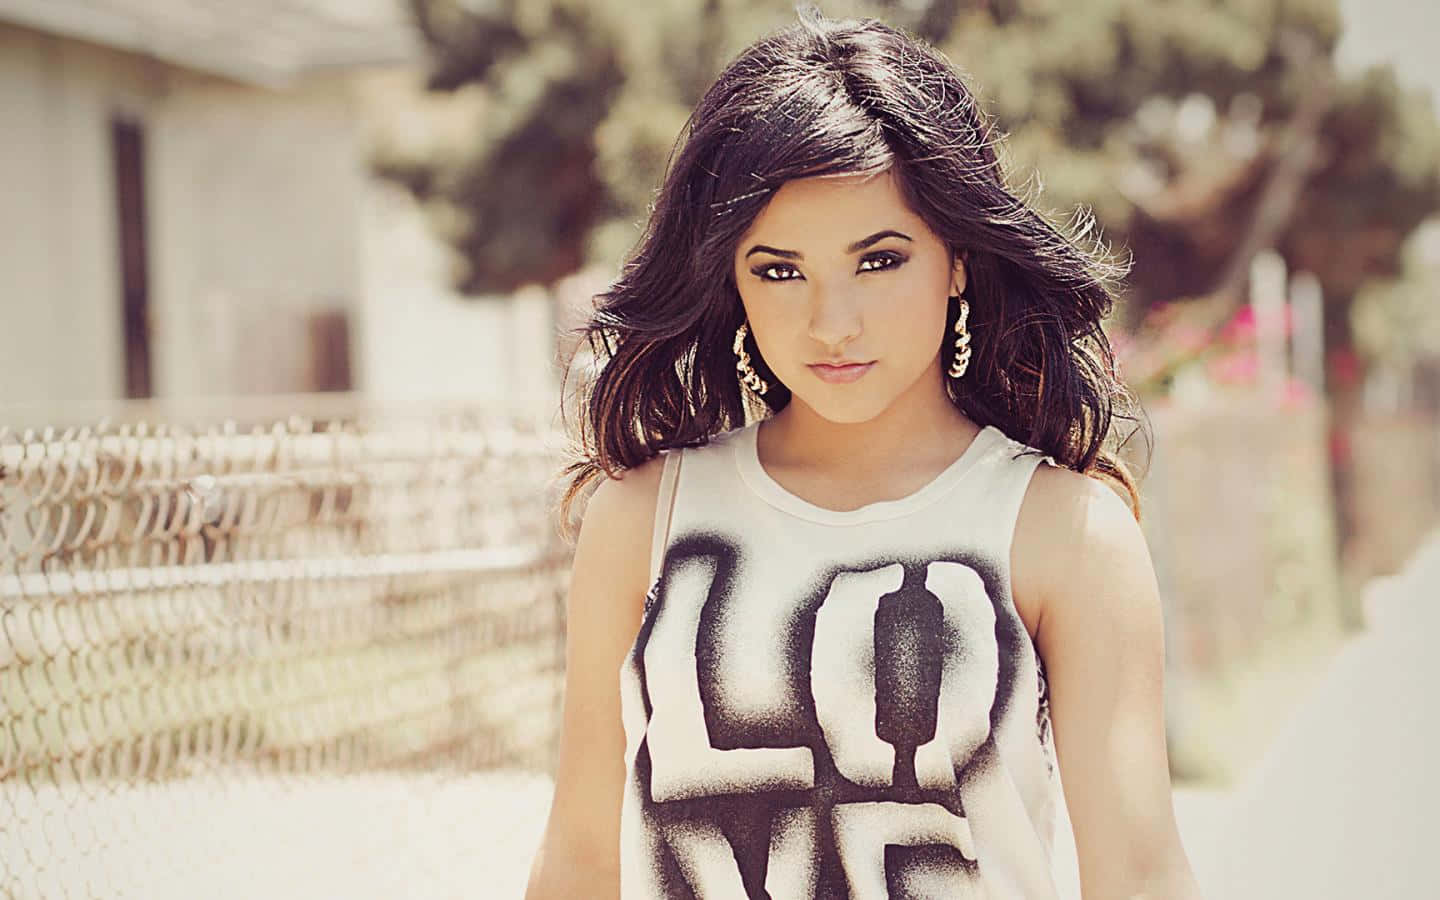 Becky G ready to take over the music world.